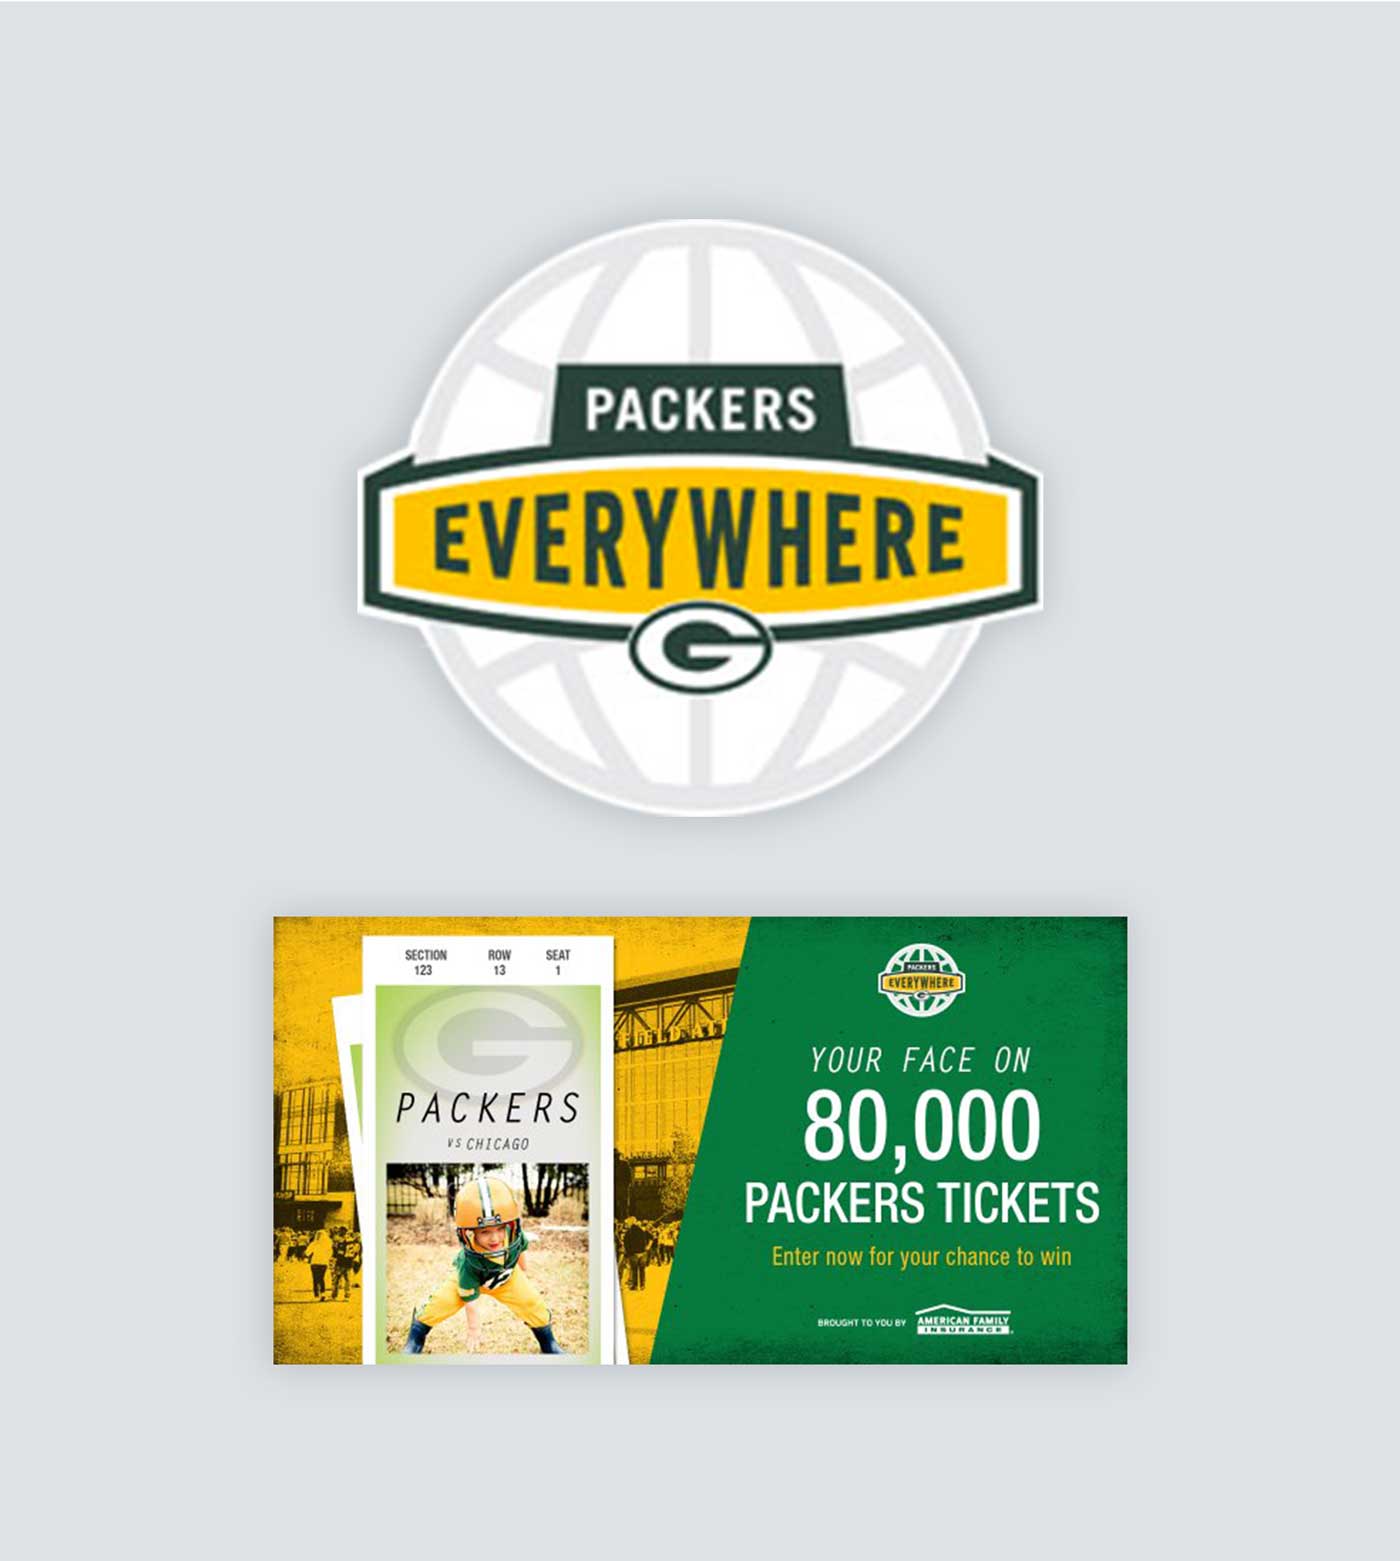 packers1